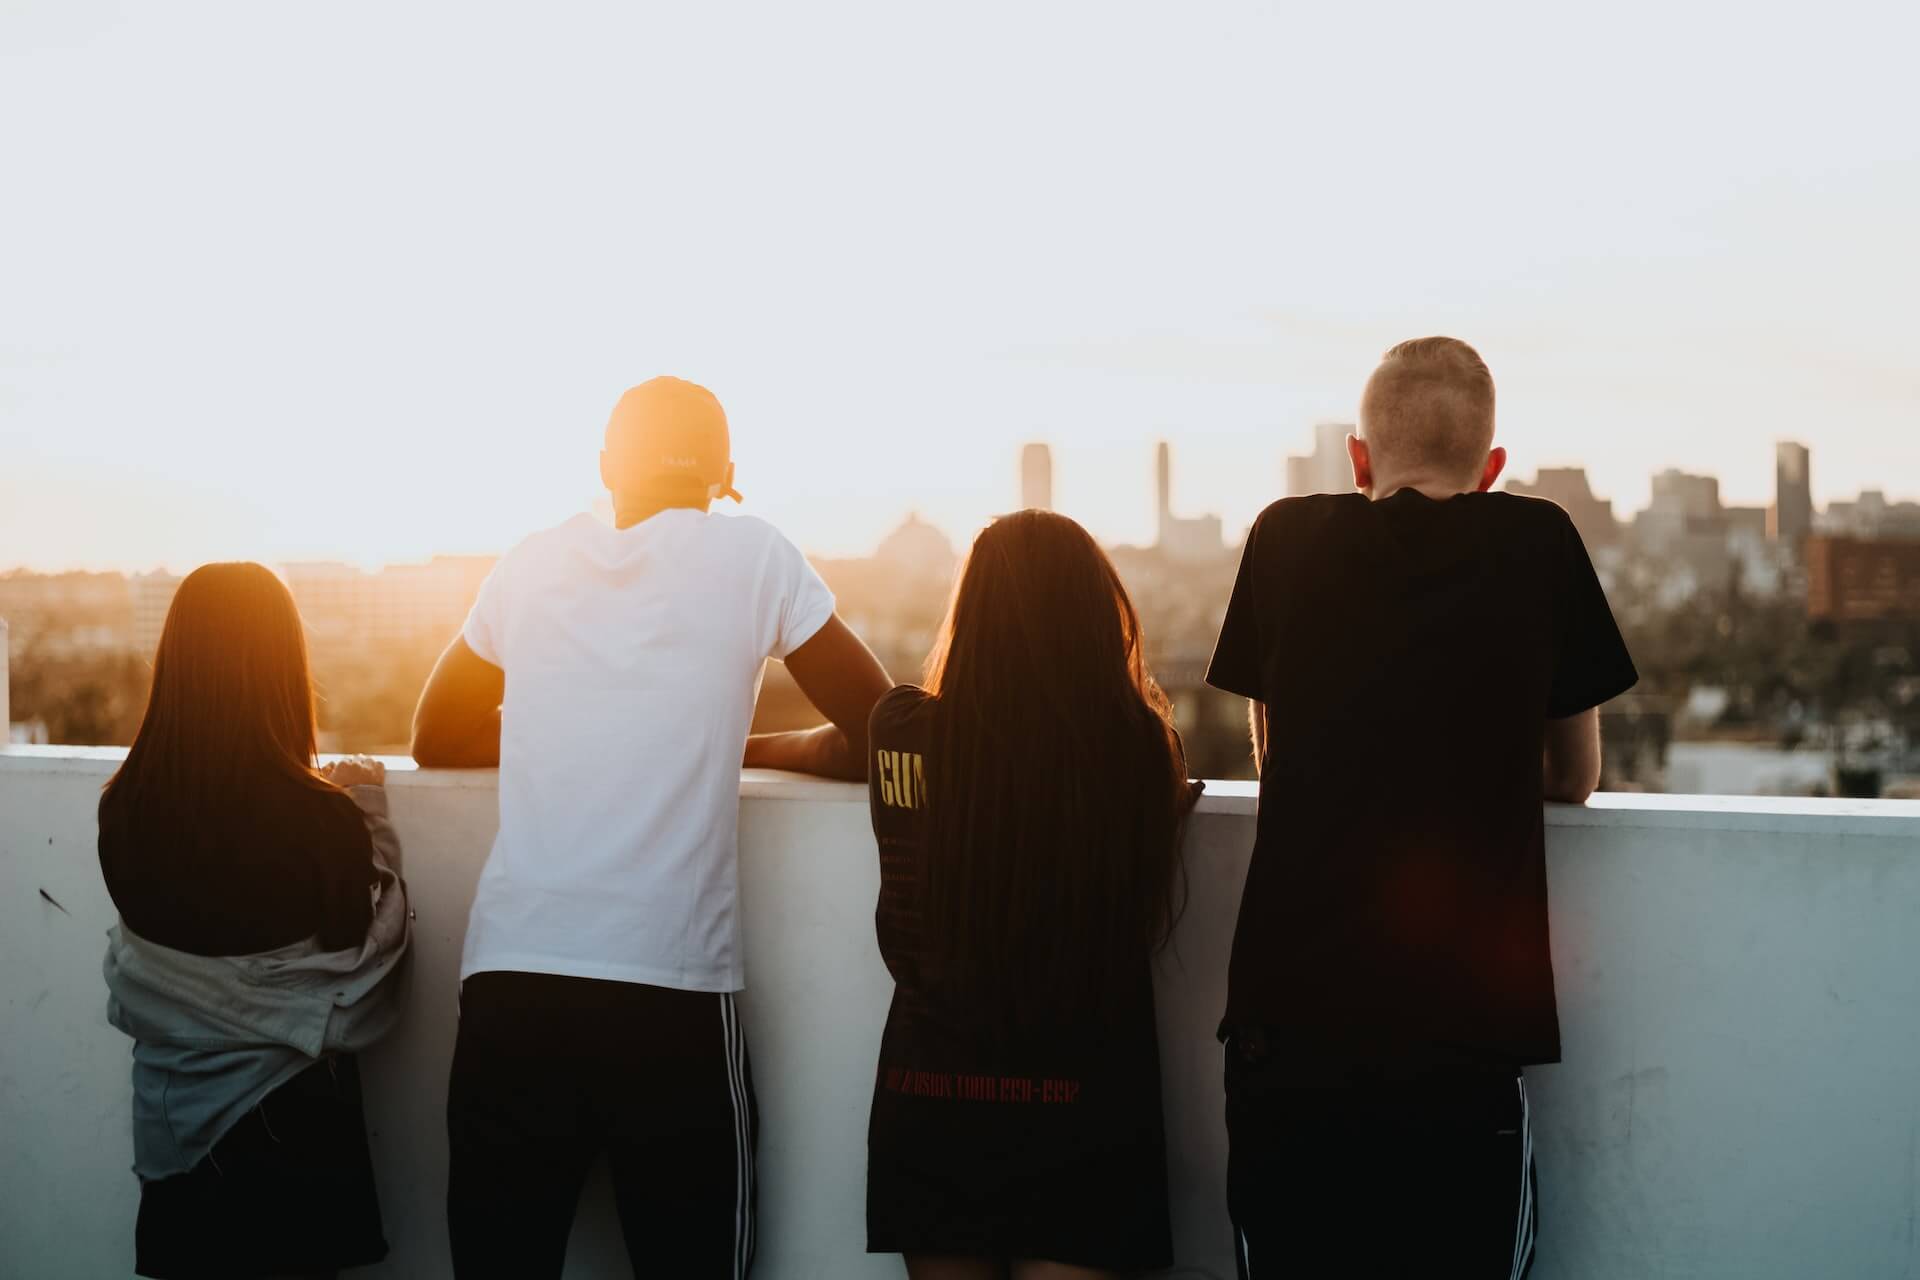 four young persons shown fromteh back looking out over a short wall observicing a city skyline at sunset